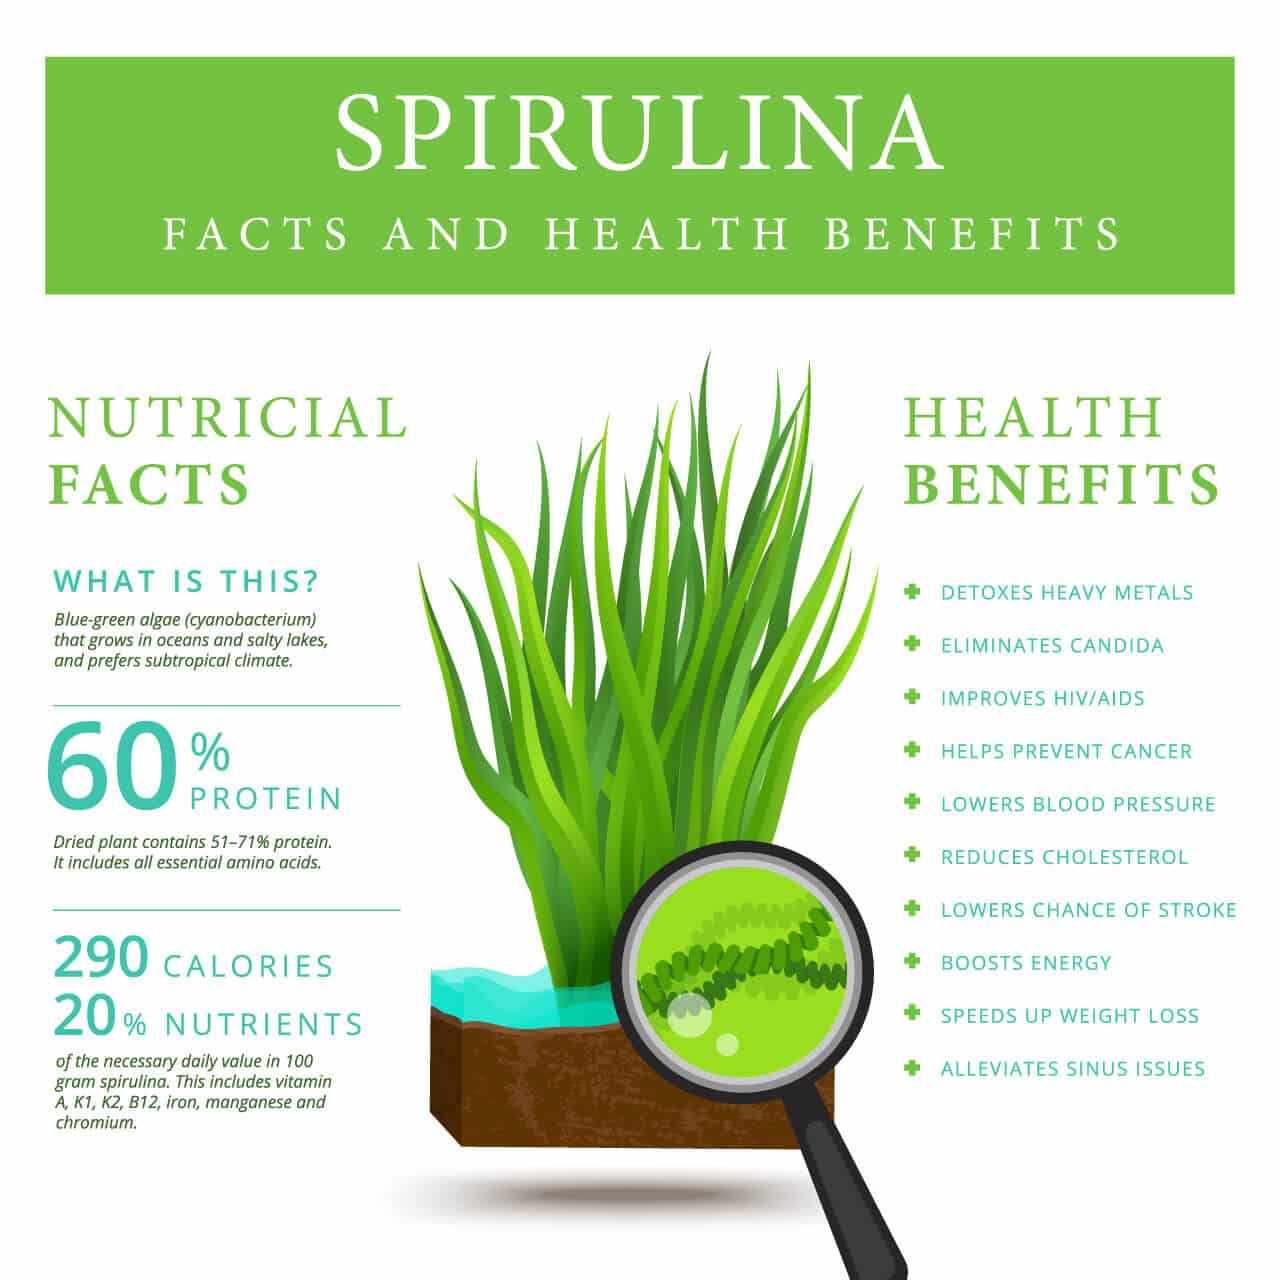 Nutrition and Health Facts Spirulina